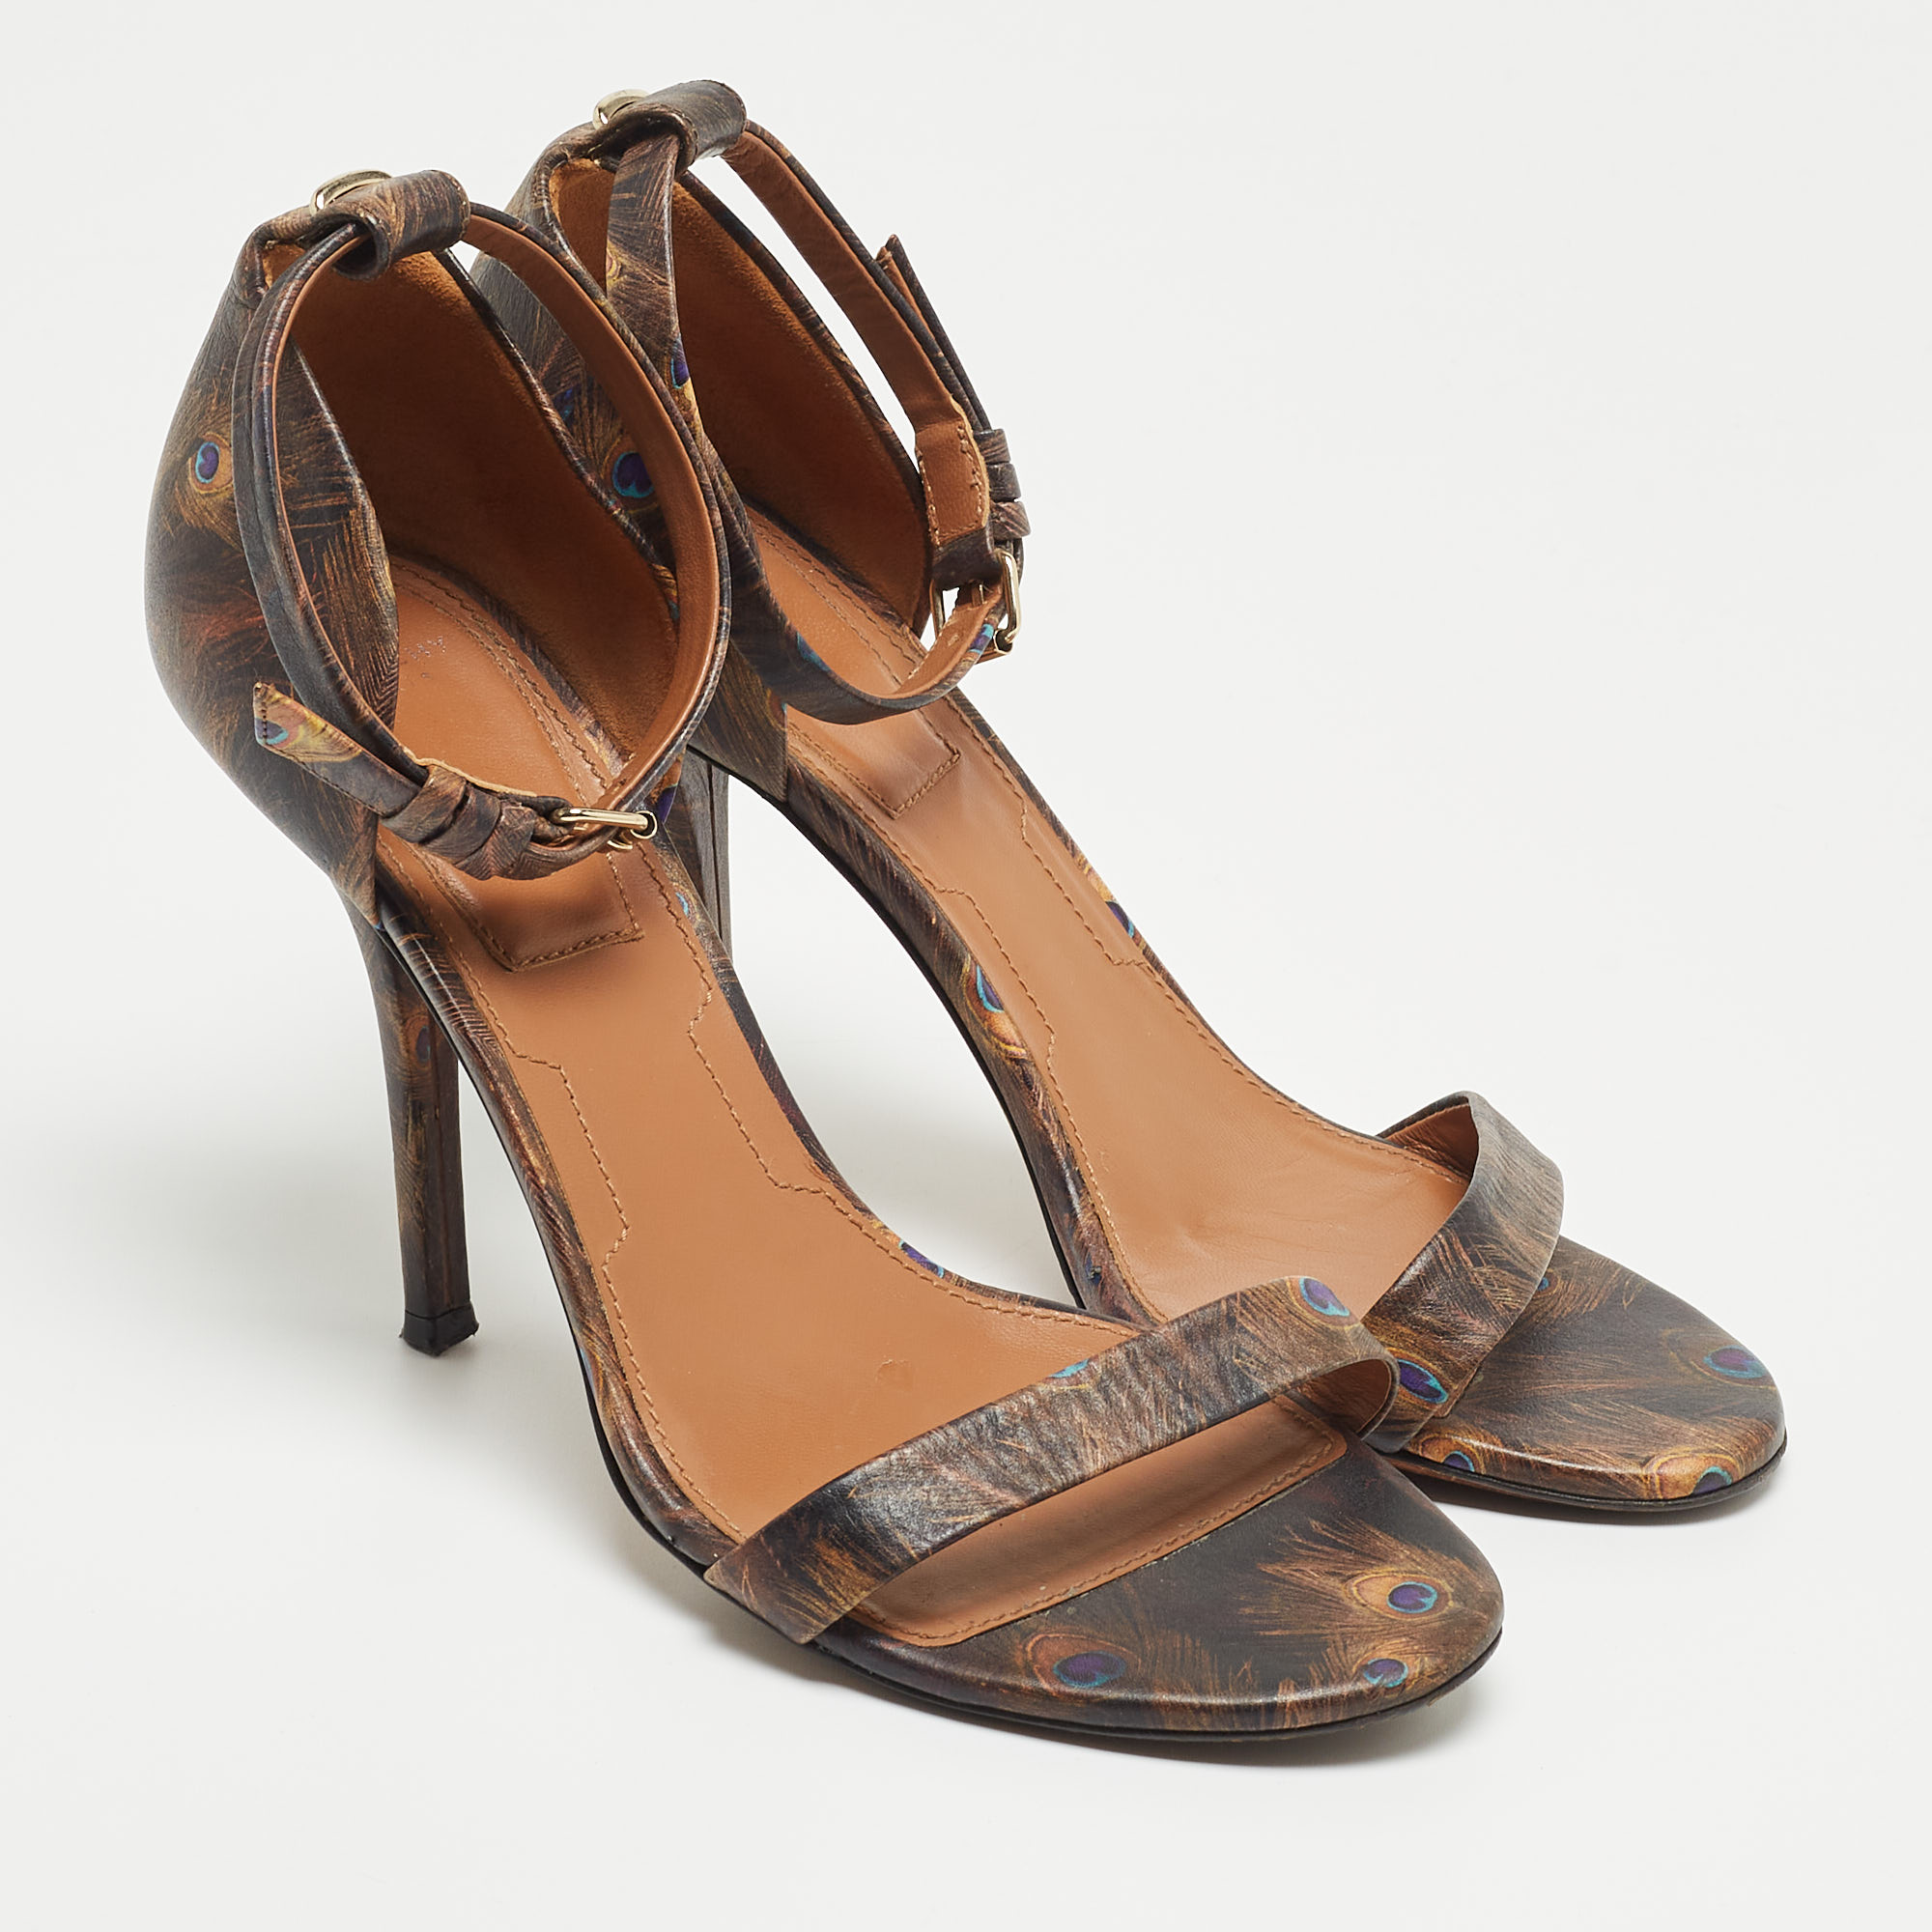 Givenchy Brown Leather Ankle Strap Sandals Size 38